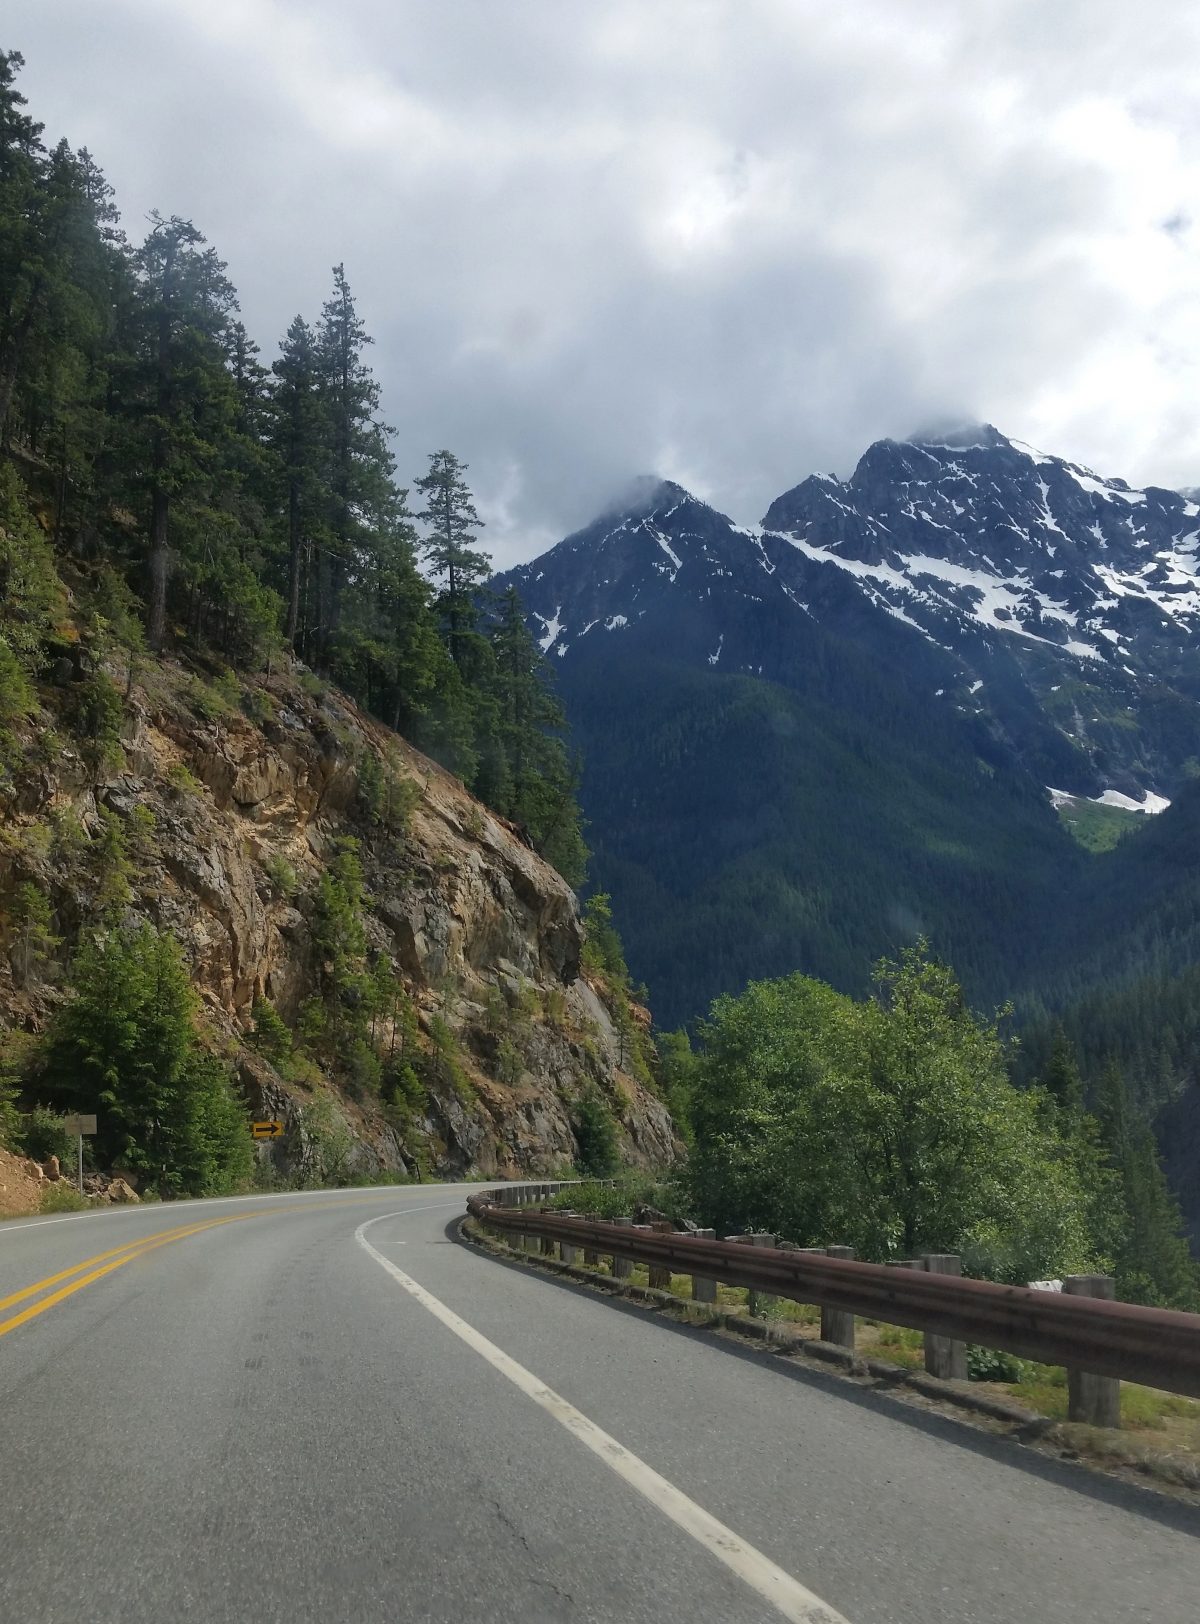 North Cascades Highway Road Trip In Washington State: Do It Yourself RV